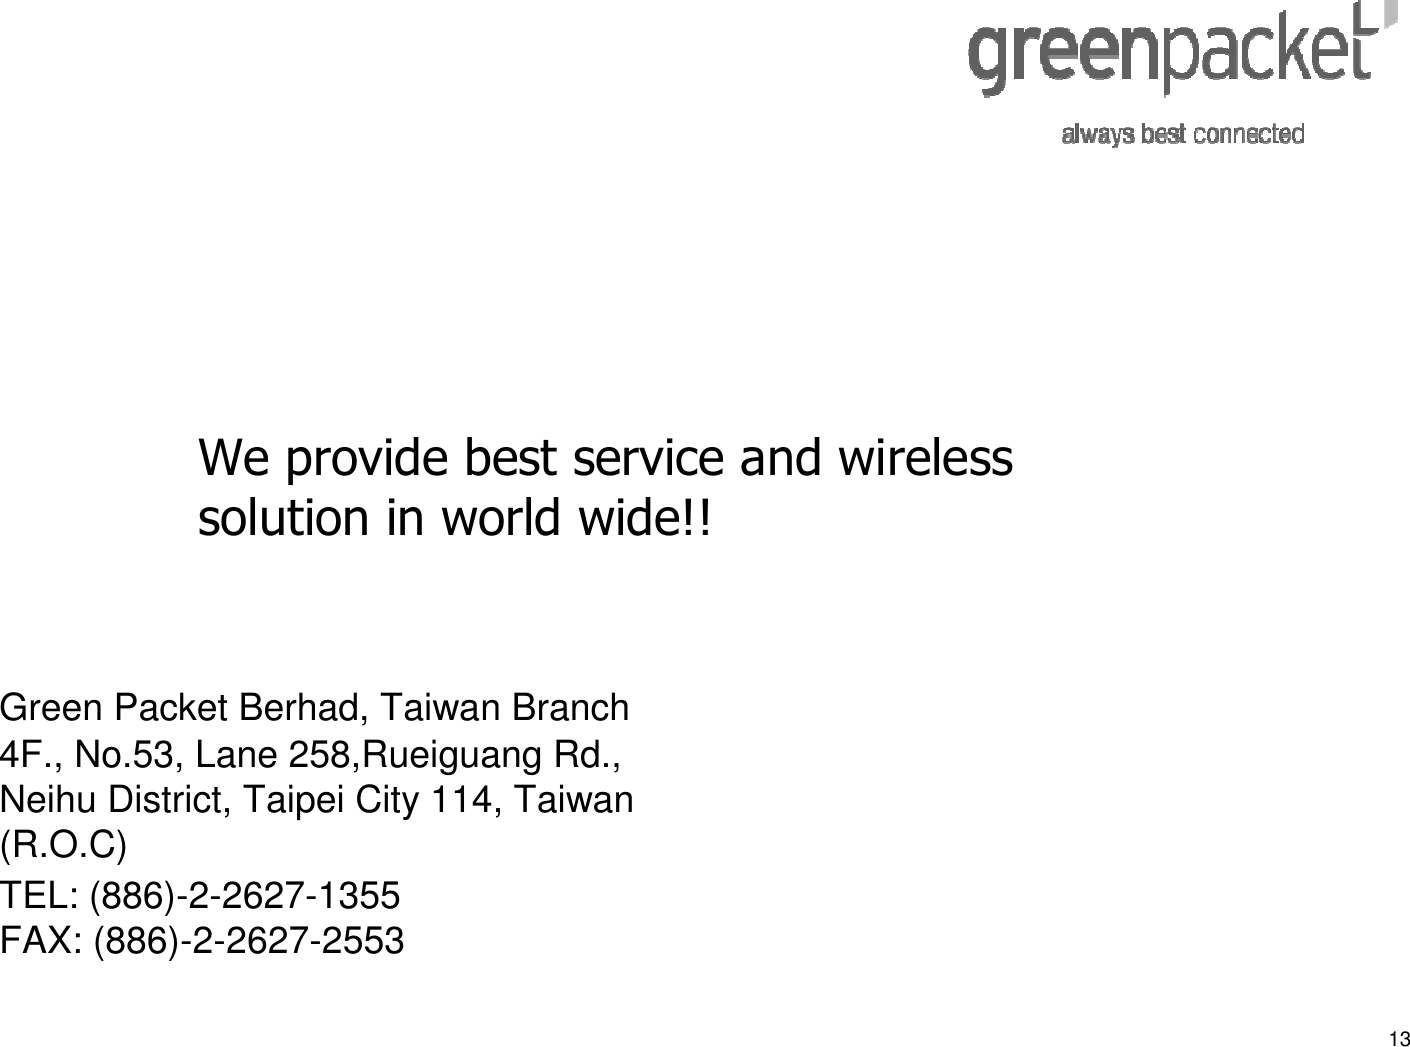 13Green Packet Berhad, Taiwan Branch4F., No.53, Lane 258,Rueiguang Rd., Neihu District, Taipei City 114, Taiwan (R.O.C)TEL: (886)-2-2627-1355 FAX: (886)-2-2627-2553We provide best service and wireless solution in world wide!!